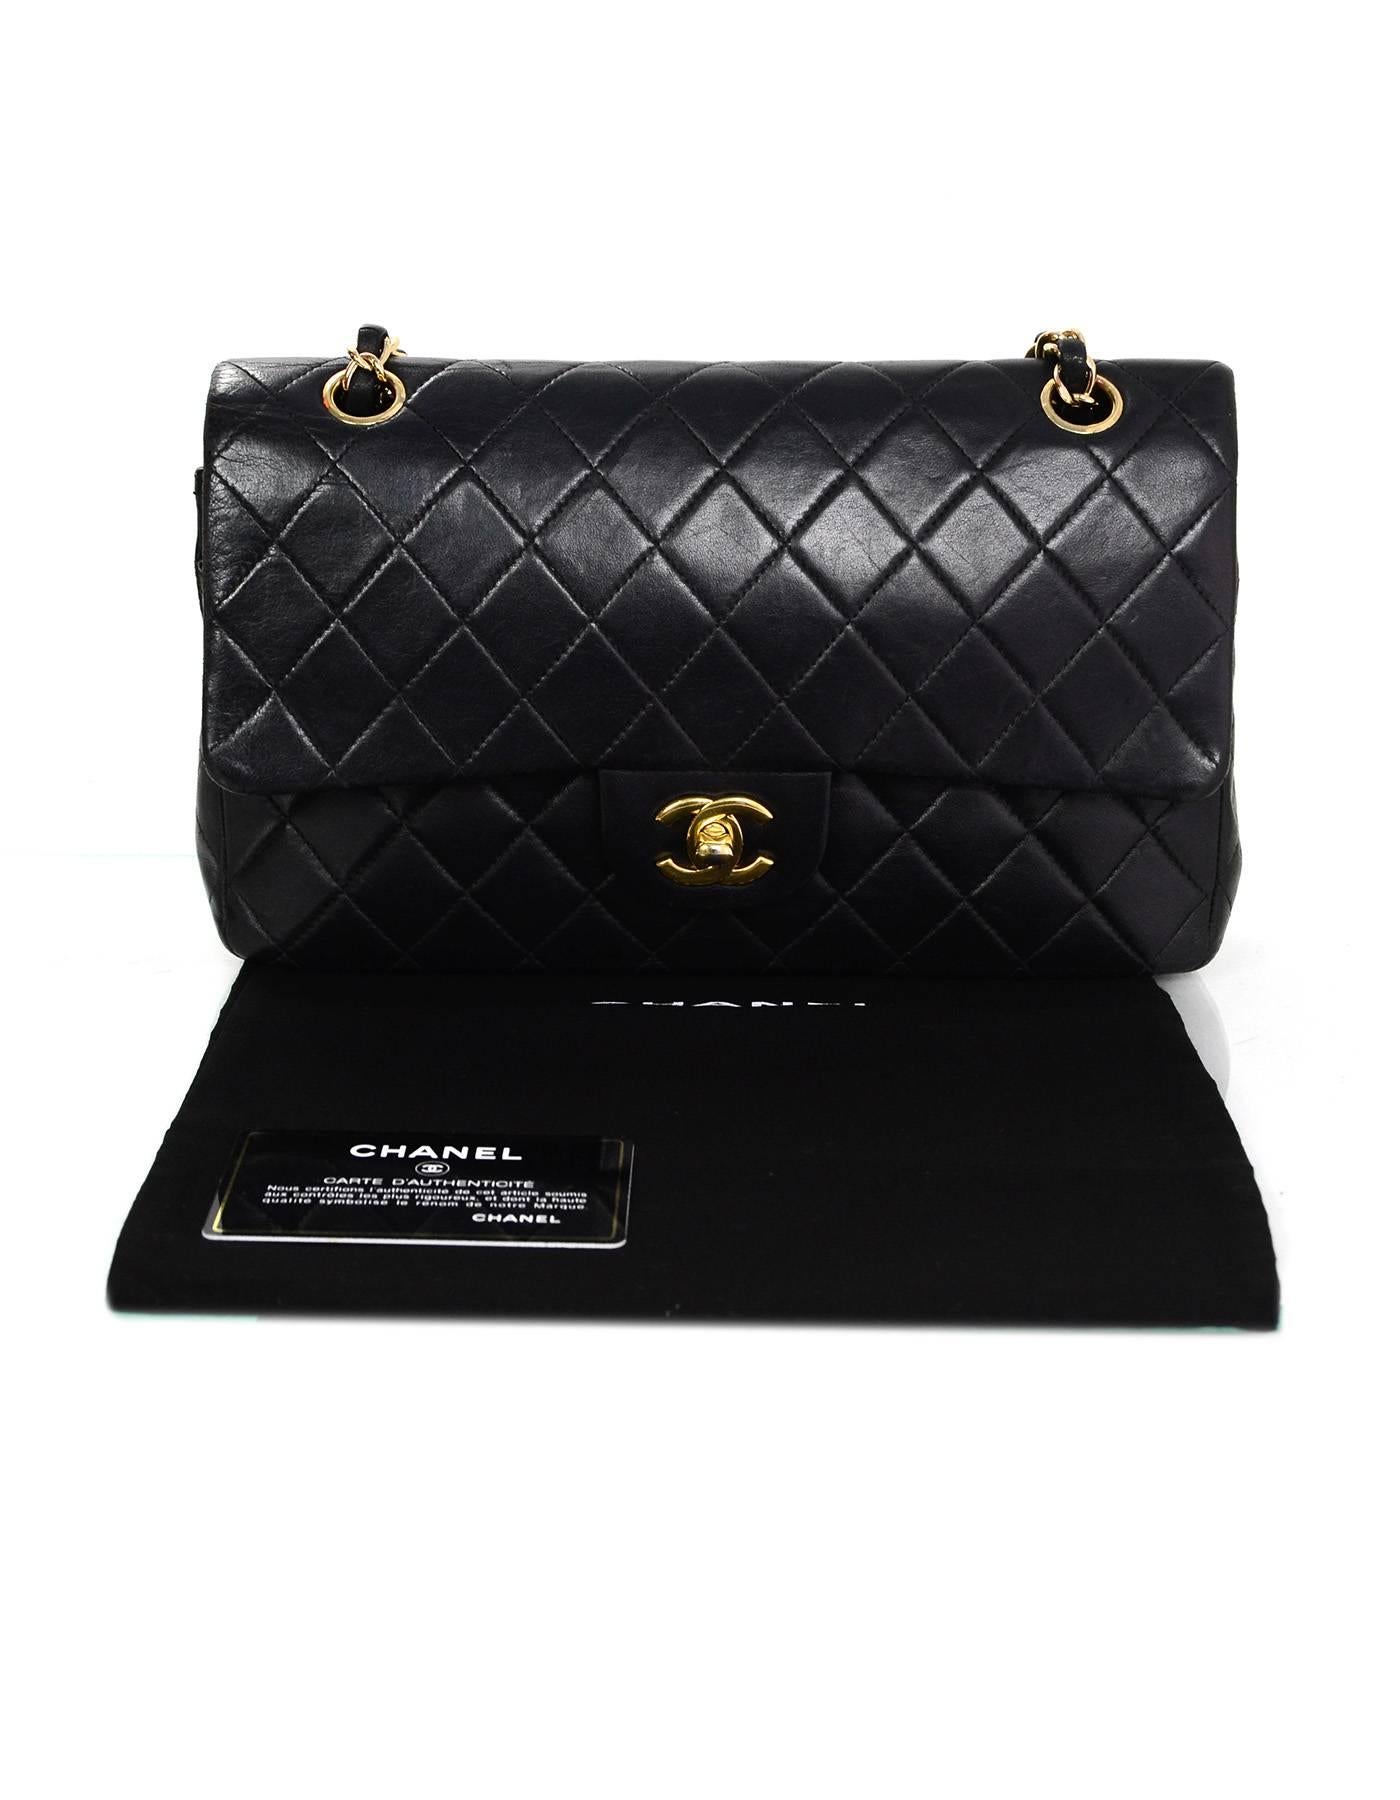 Chanel Black Lambskin Leather Quilted Classic Medium 10